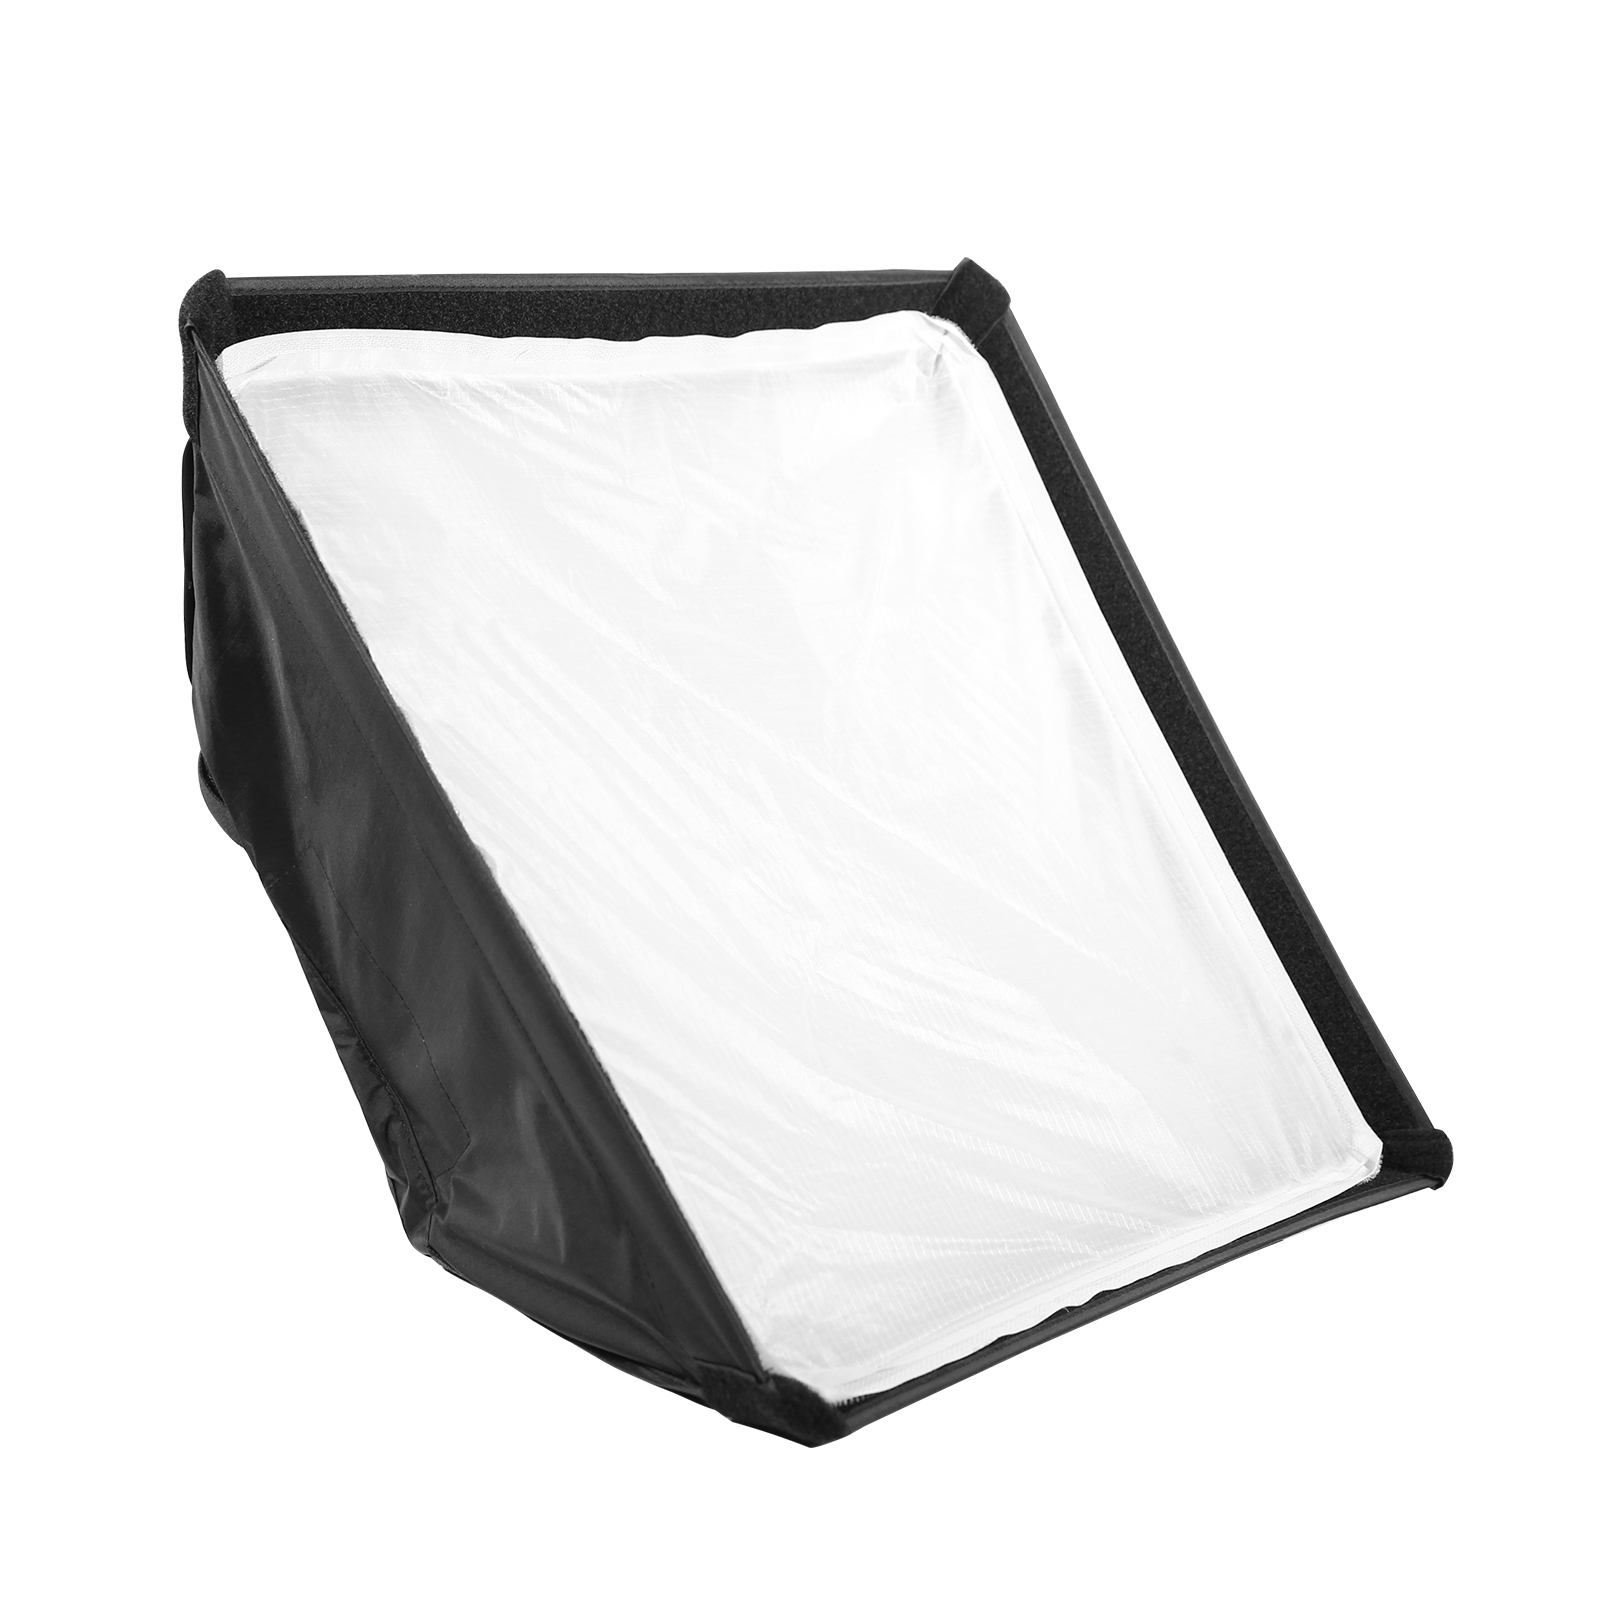 Pixel F5c LED Softbox Diffuser, soft light, delicate and even.